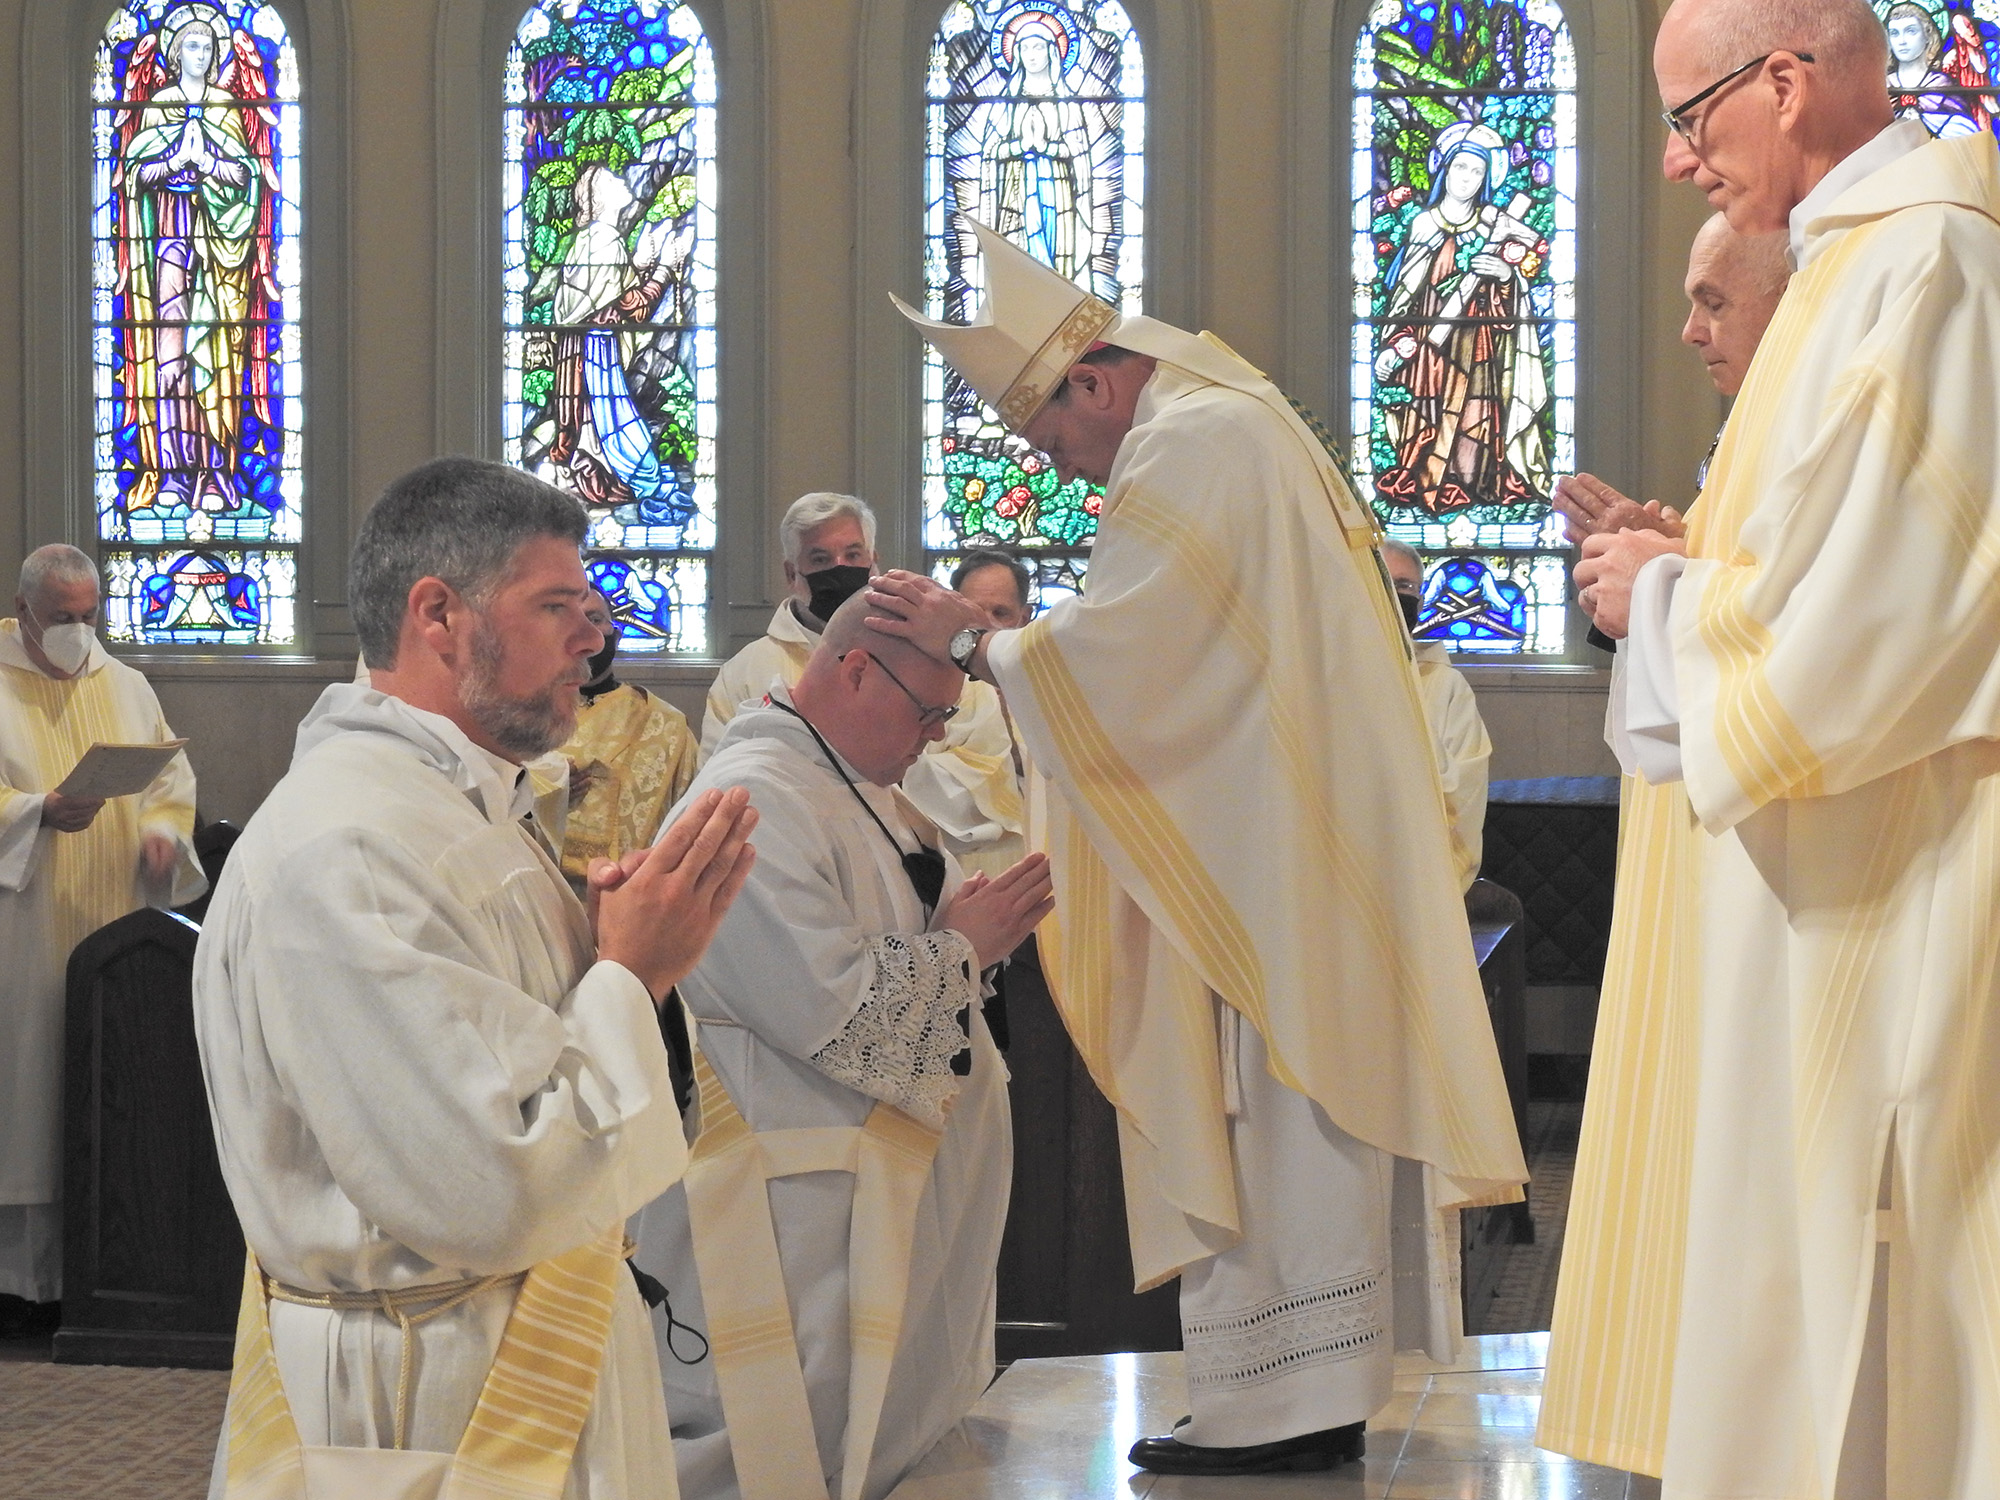 Robert Johnson and Thomas Kennedy were ordained to the holy priesthood on May 22, 2021 at St. Francis Xavier Cathedral in Alexandria. 